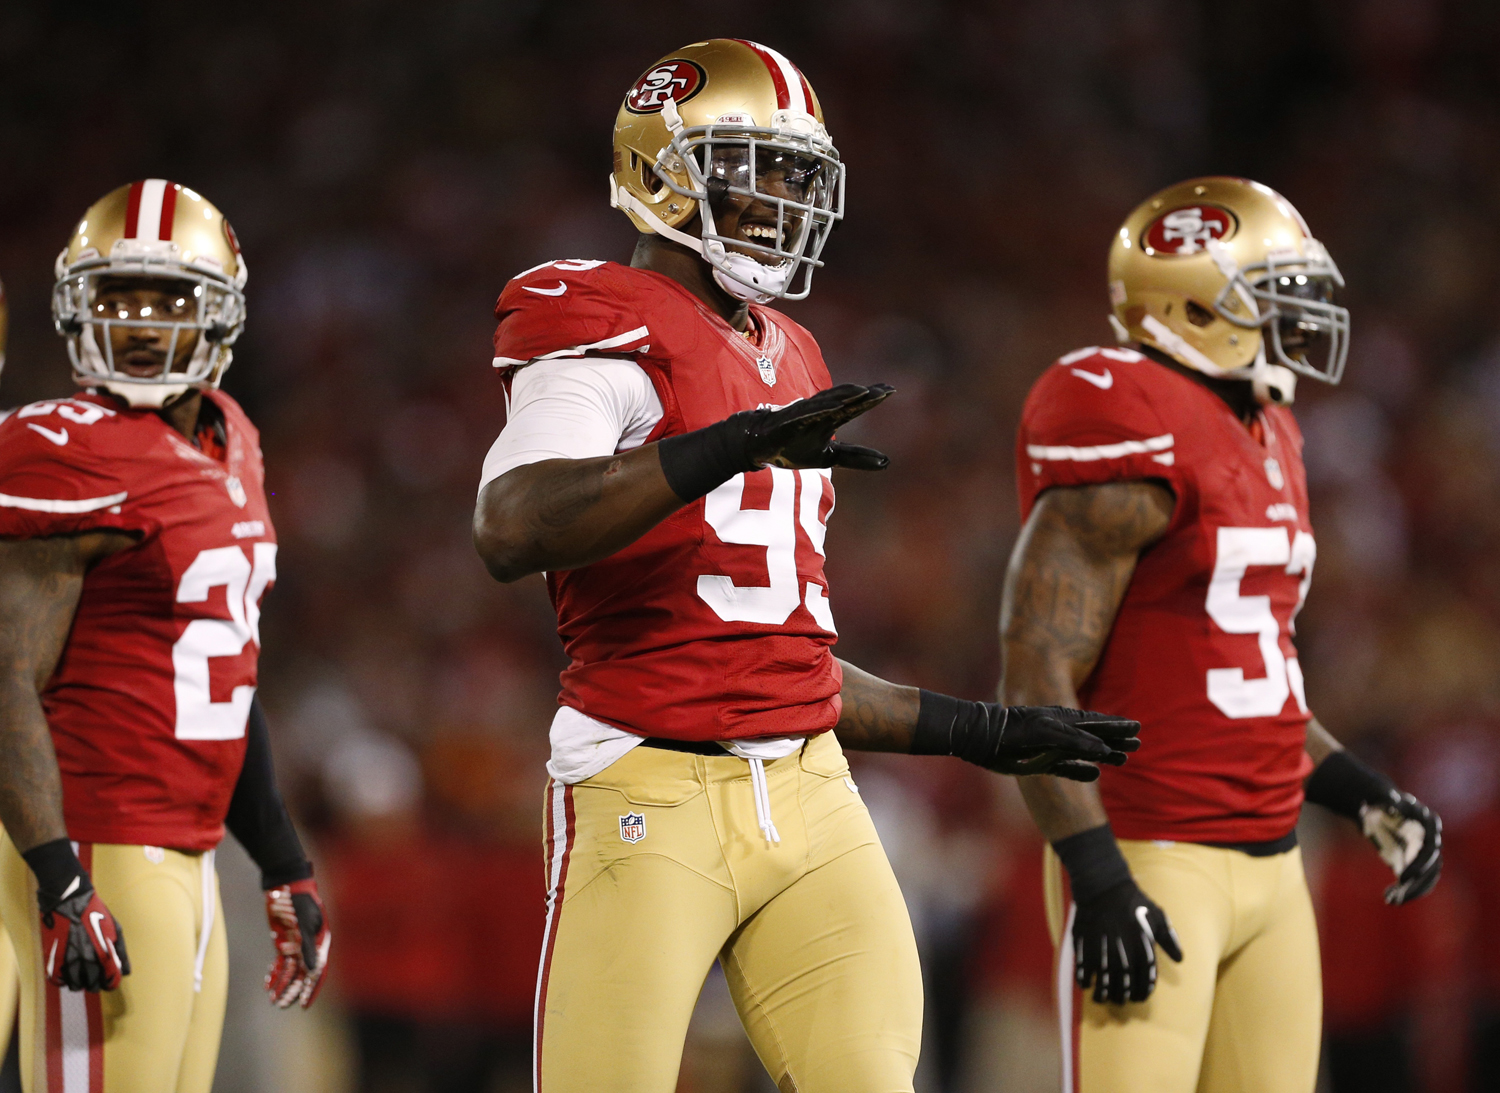 San Francisco 49ers outside linebacker Aldon Smith (99) reacts after sacking Chicago Bears quarterback Jason Campbell during the first half of their NFL football game San Francisco